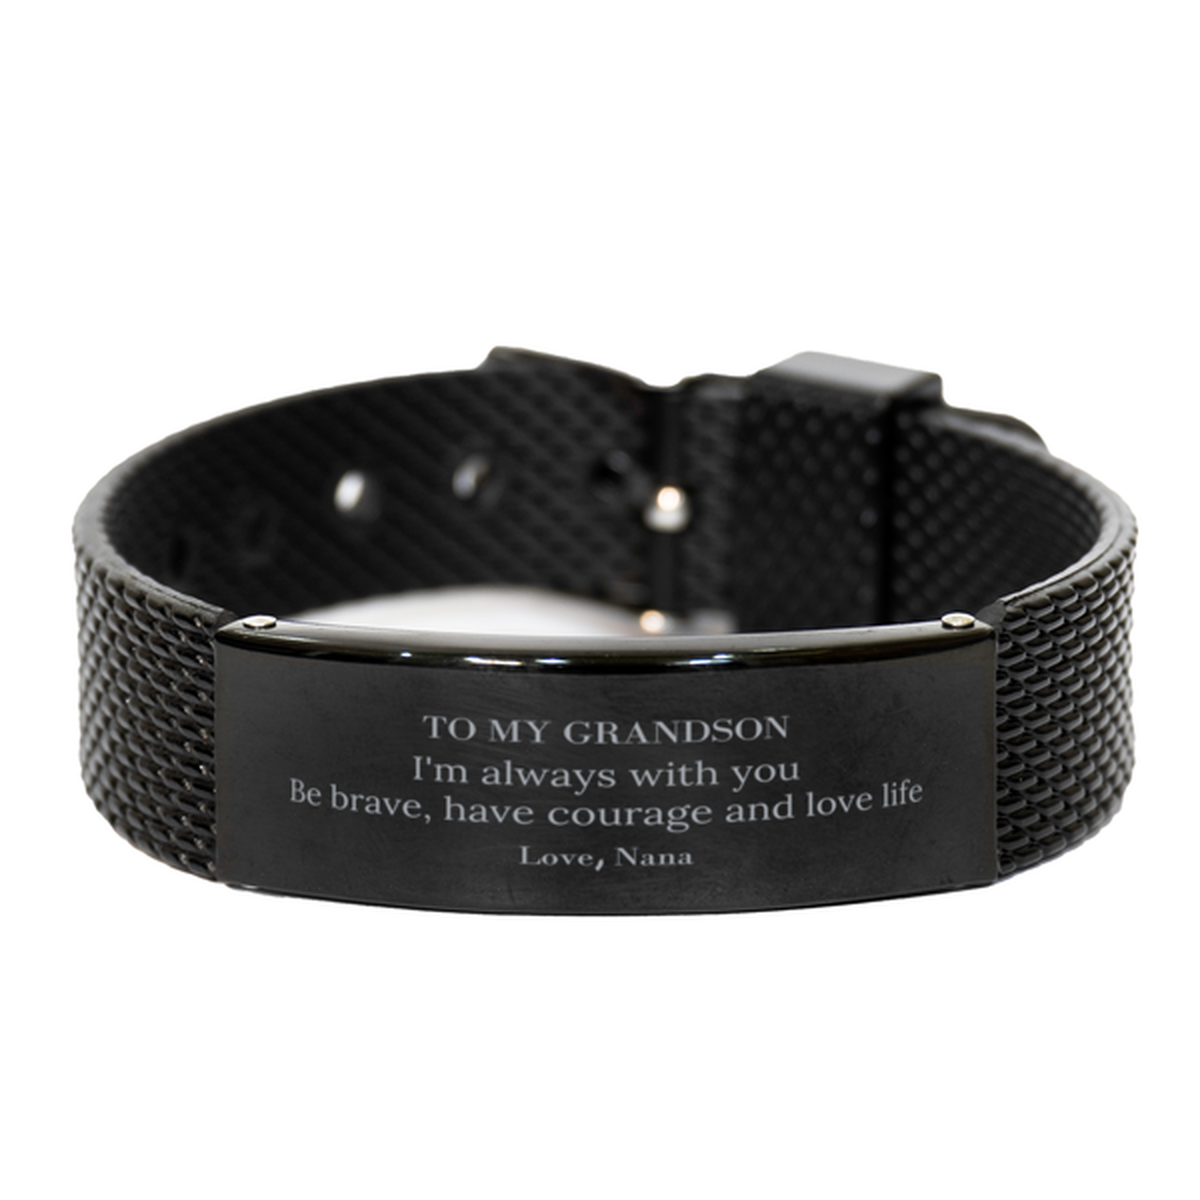 To My Grandson Gifts from Nana, Unique Black Shark Mesh Bracelet Inspirational Christmas Birthday Graduation Gifts for Grandson I'm always with you. Be brave, have courage and love life. Love, Nana